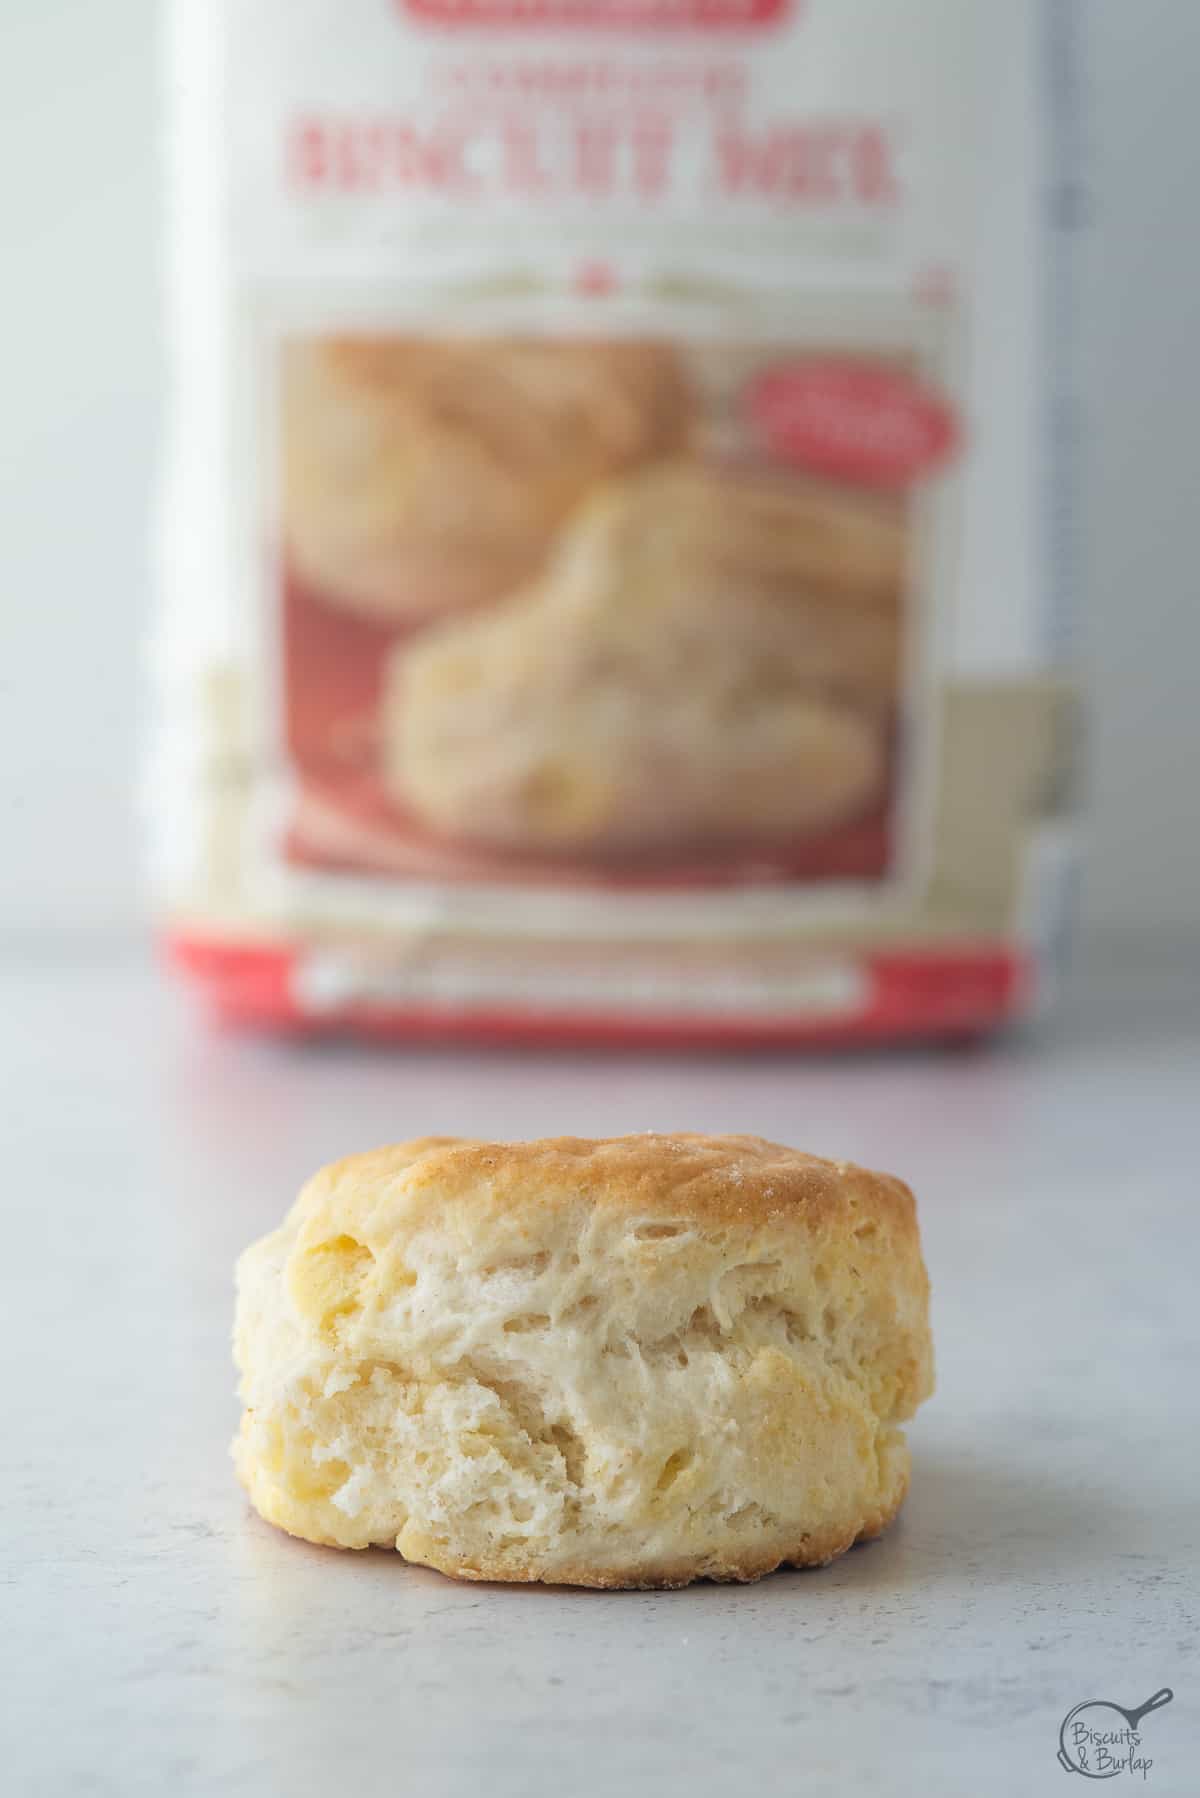 biscuit in front of southern biscuit mix